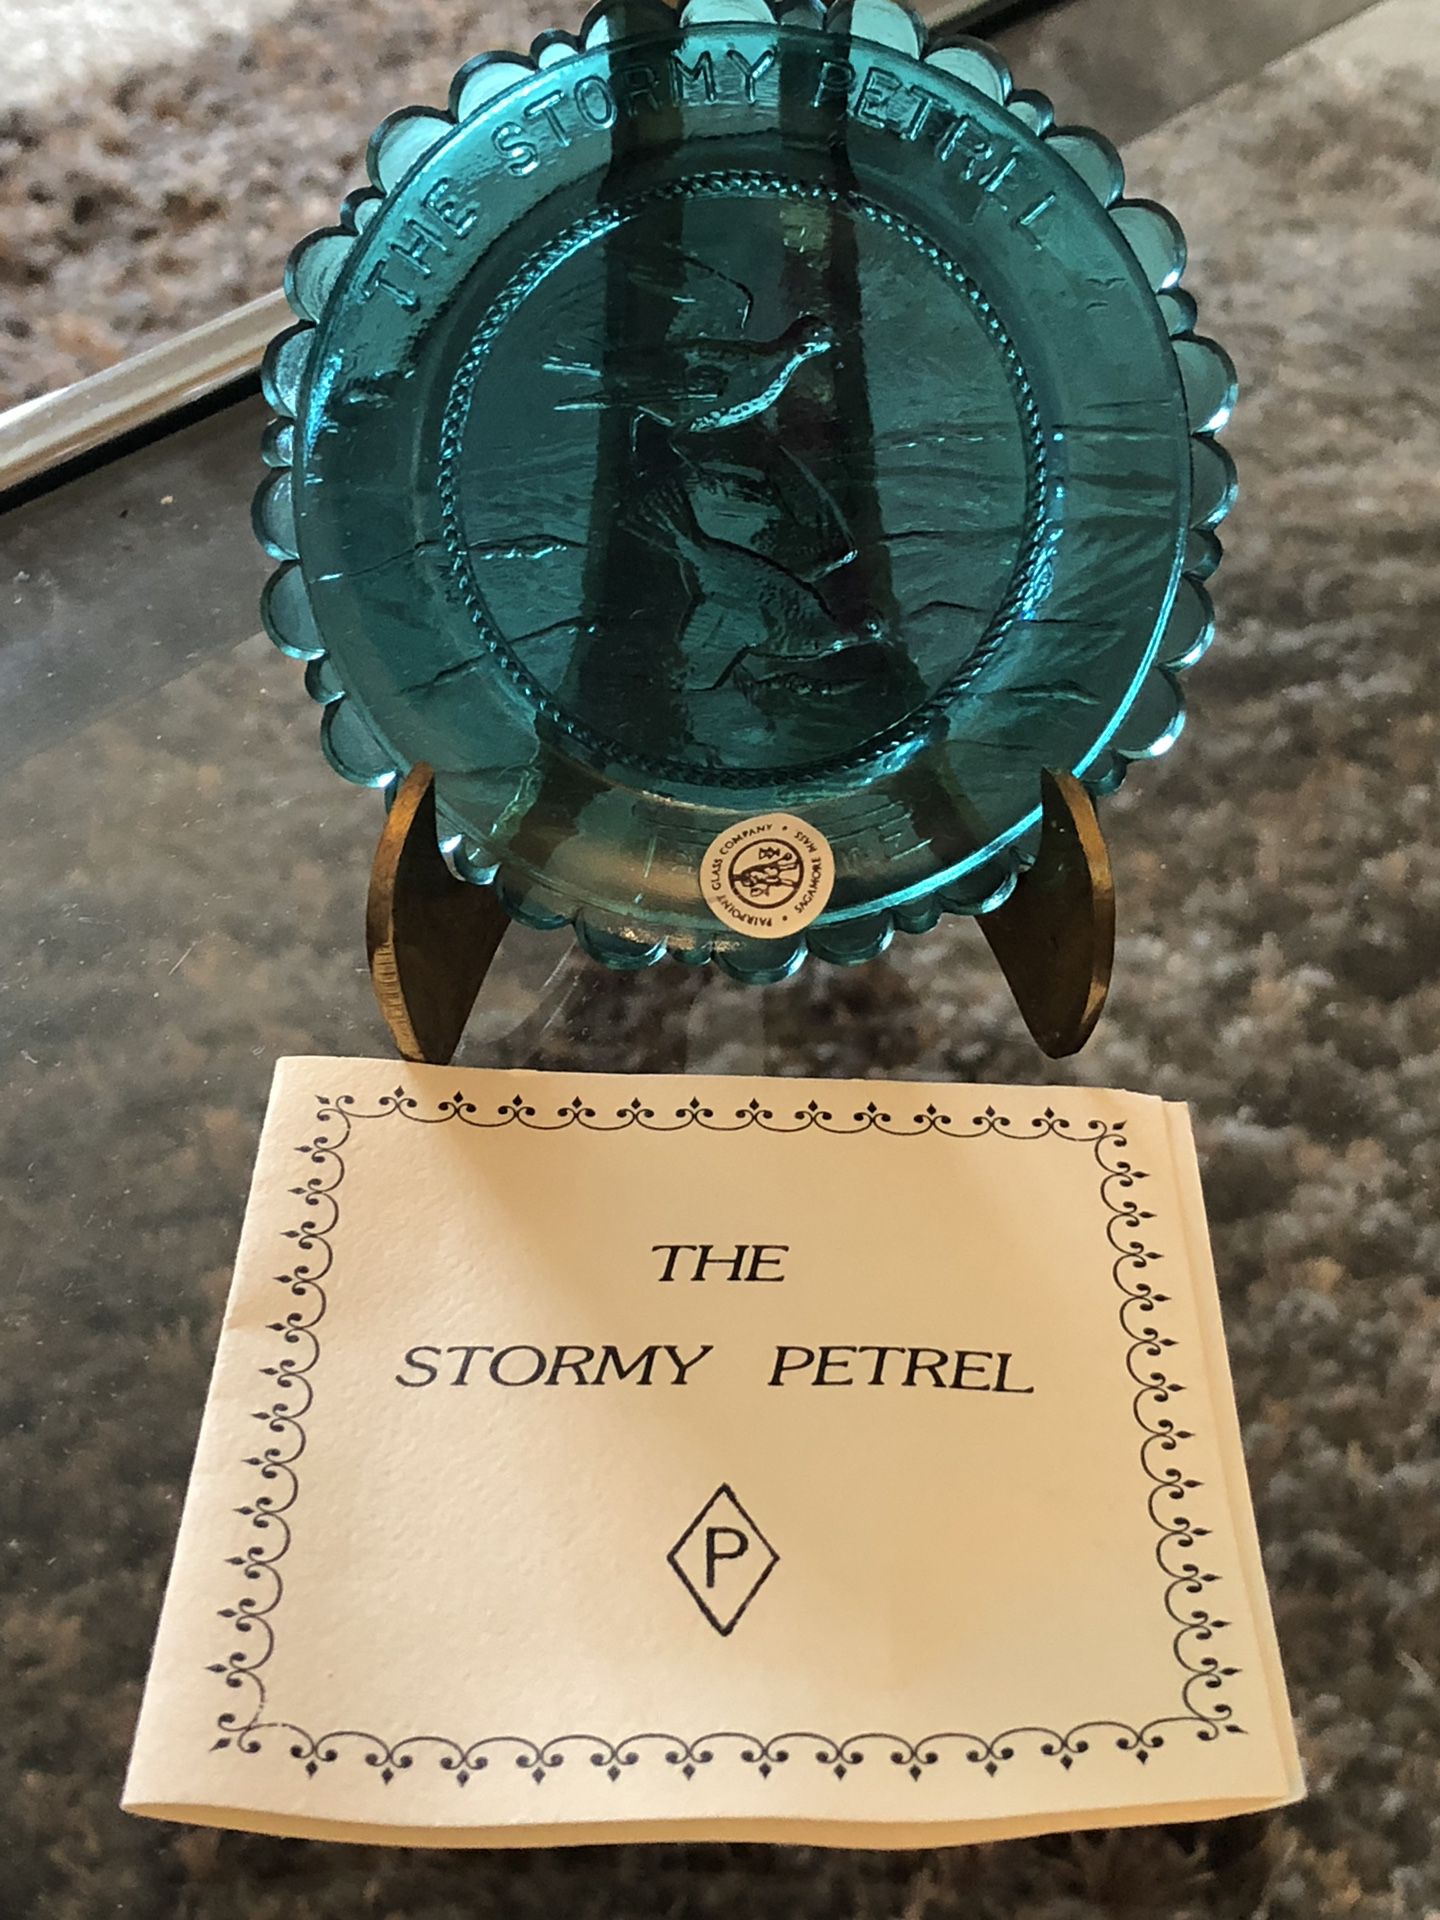 Mini Fairpoint Glass Plate “The Stormy Petrel” plus 40 Others for Sale